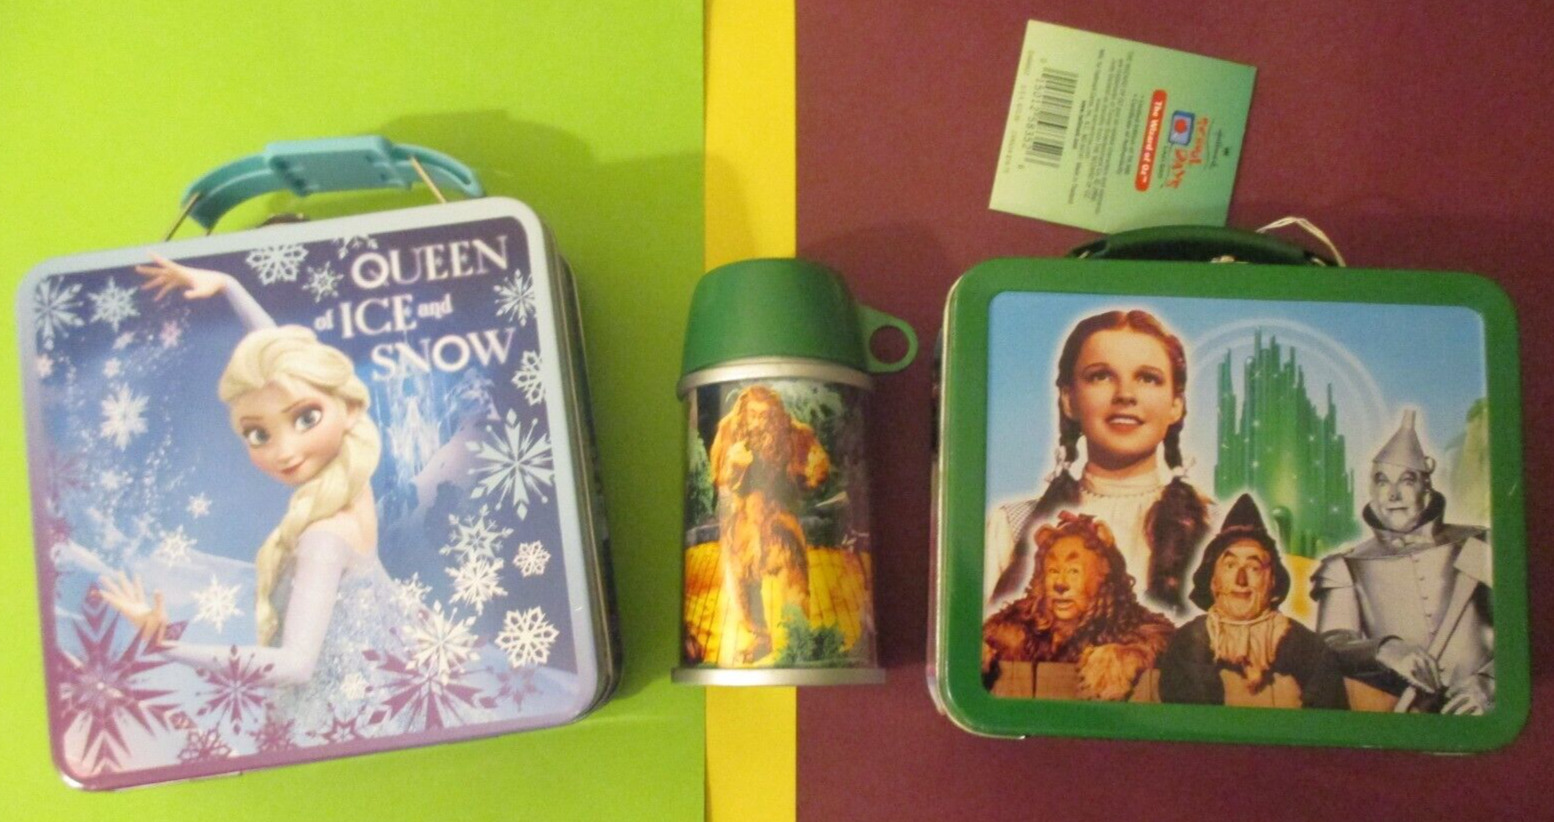 LOT of 2 MINI  LUNCH BOXes - WIZARD Of OZ + Thermos #12,722 & FROZEN ELSA GIRLs